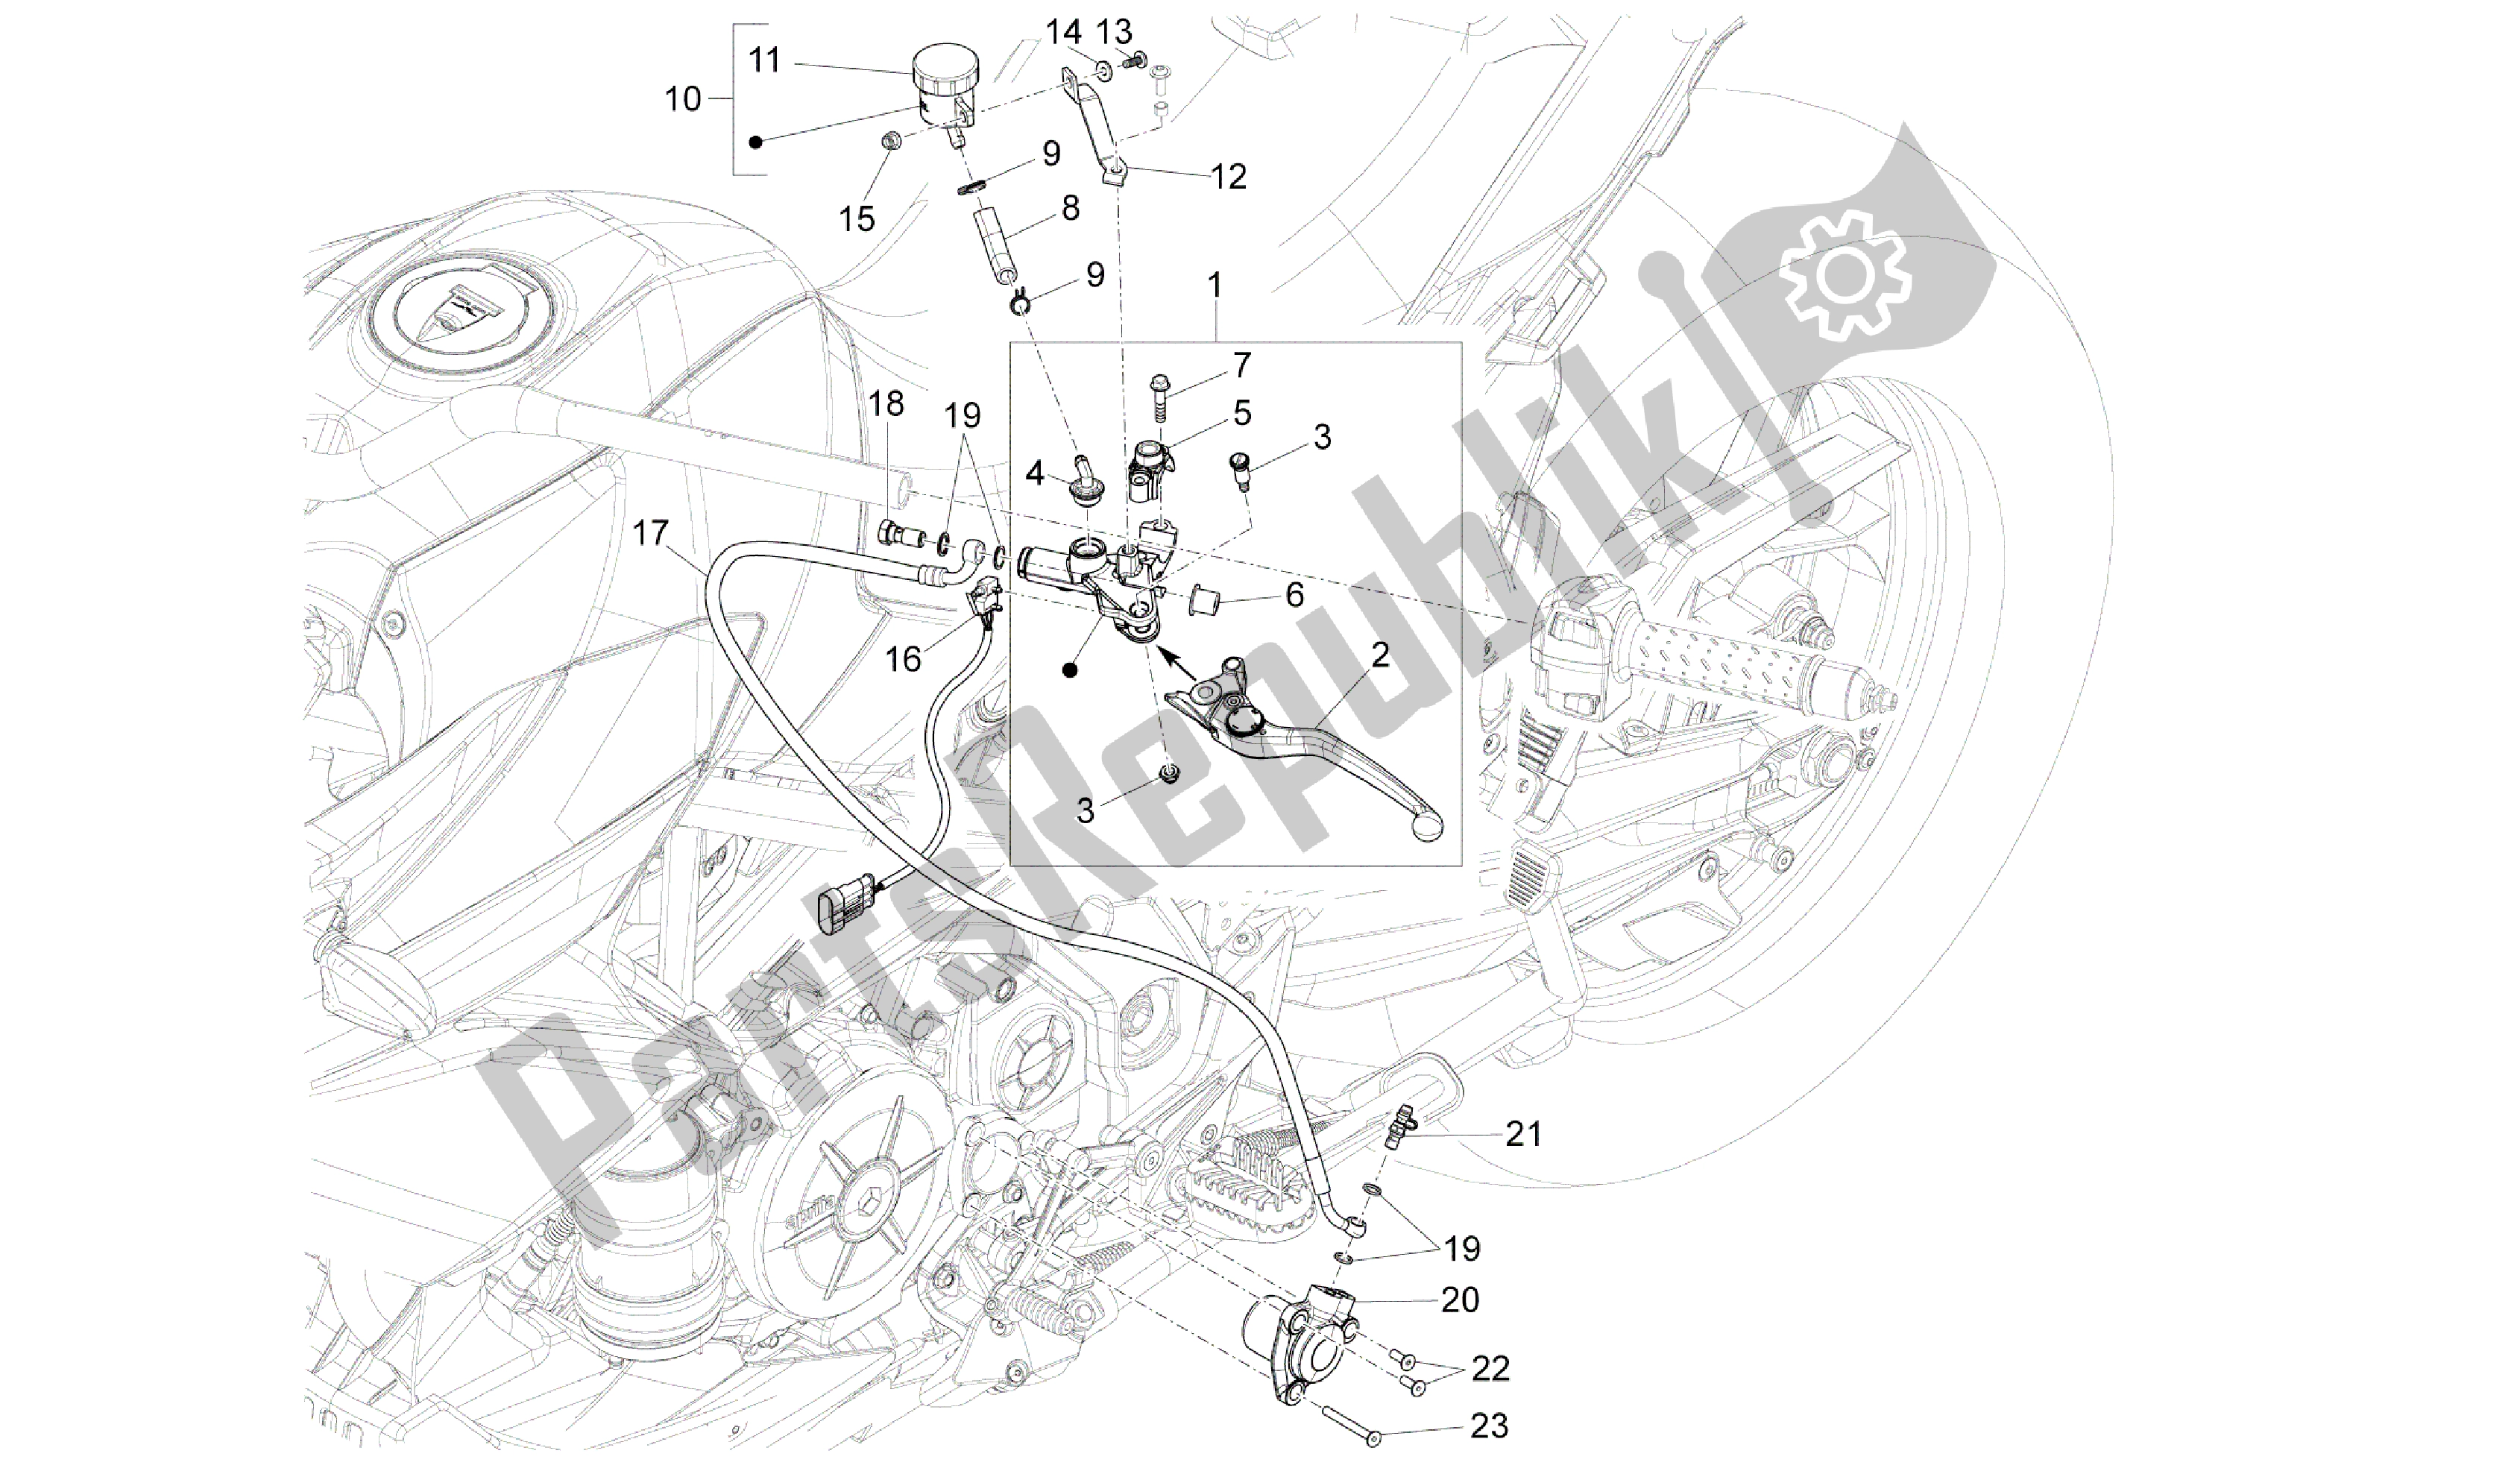 All parts for the Clutch Control of the Aprilia Caponord 1200 2013 - 2015